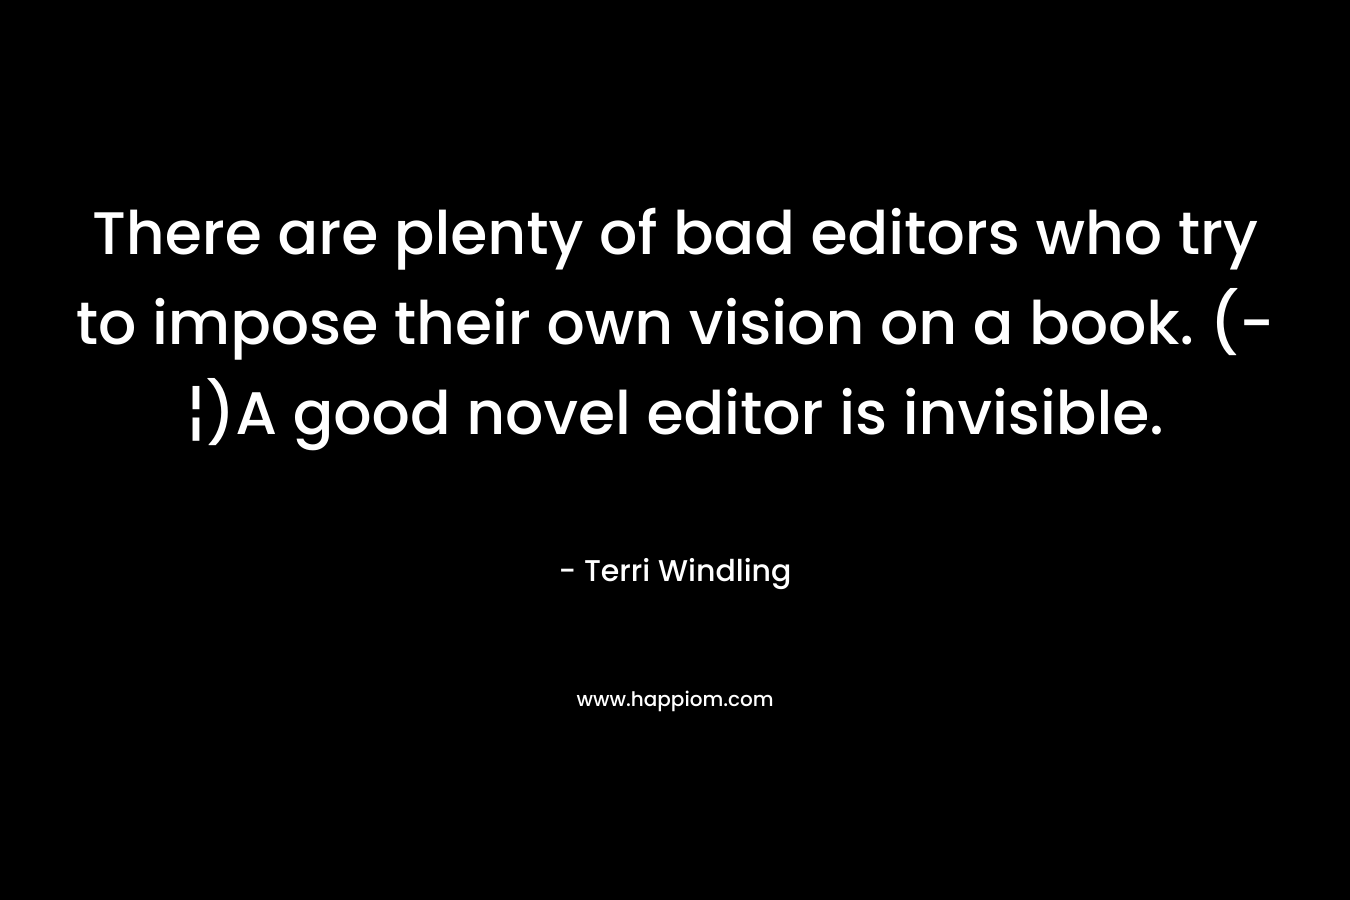 There are plenty of bad editors who try to impose their own vision on a book. (-¦)A good novel editor is invisible. – Terri Windling